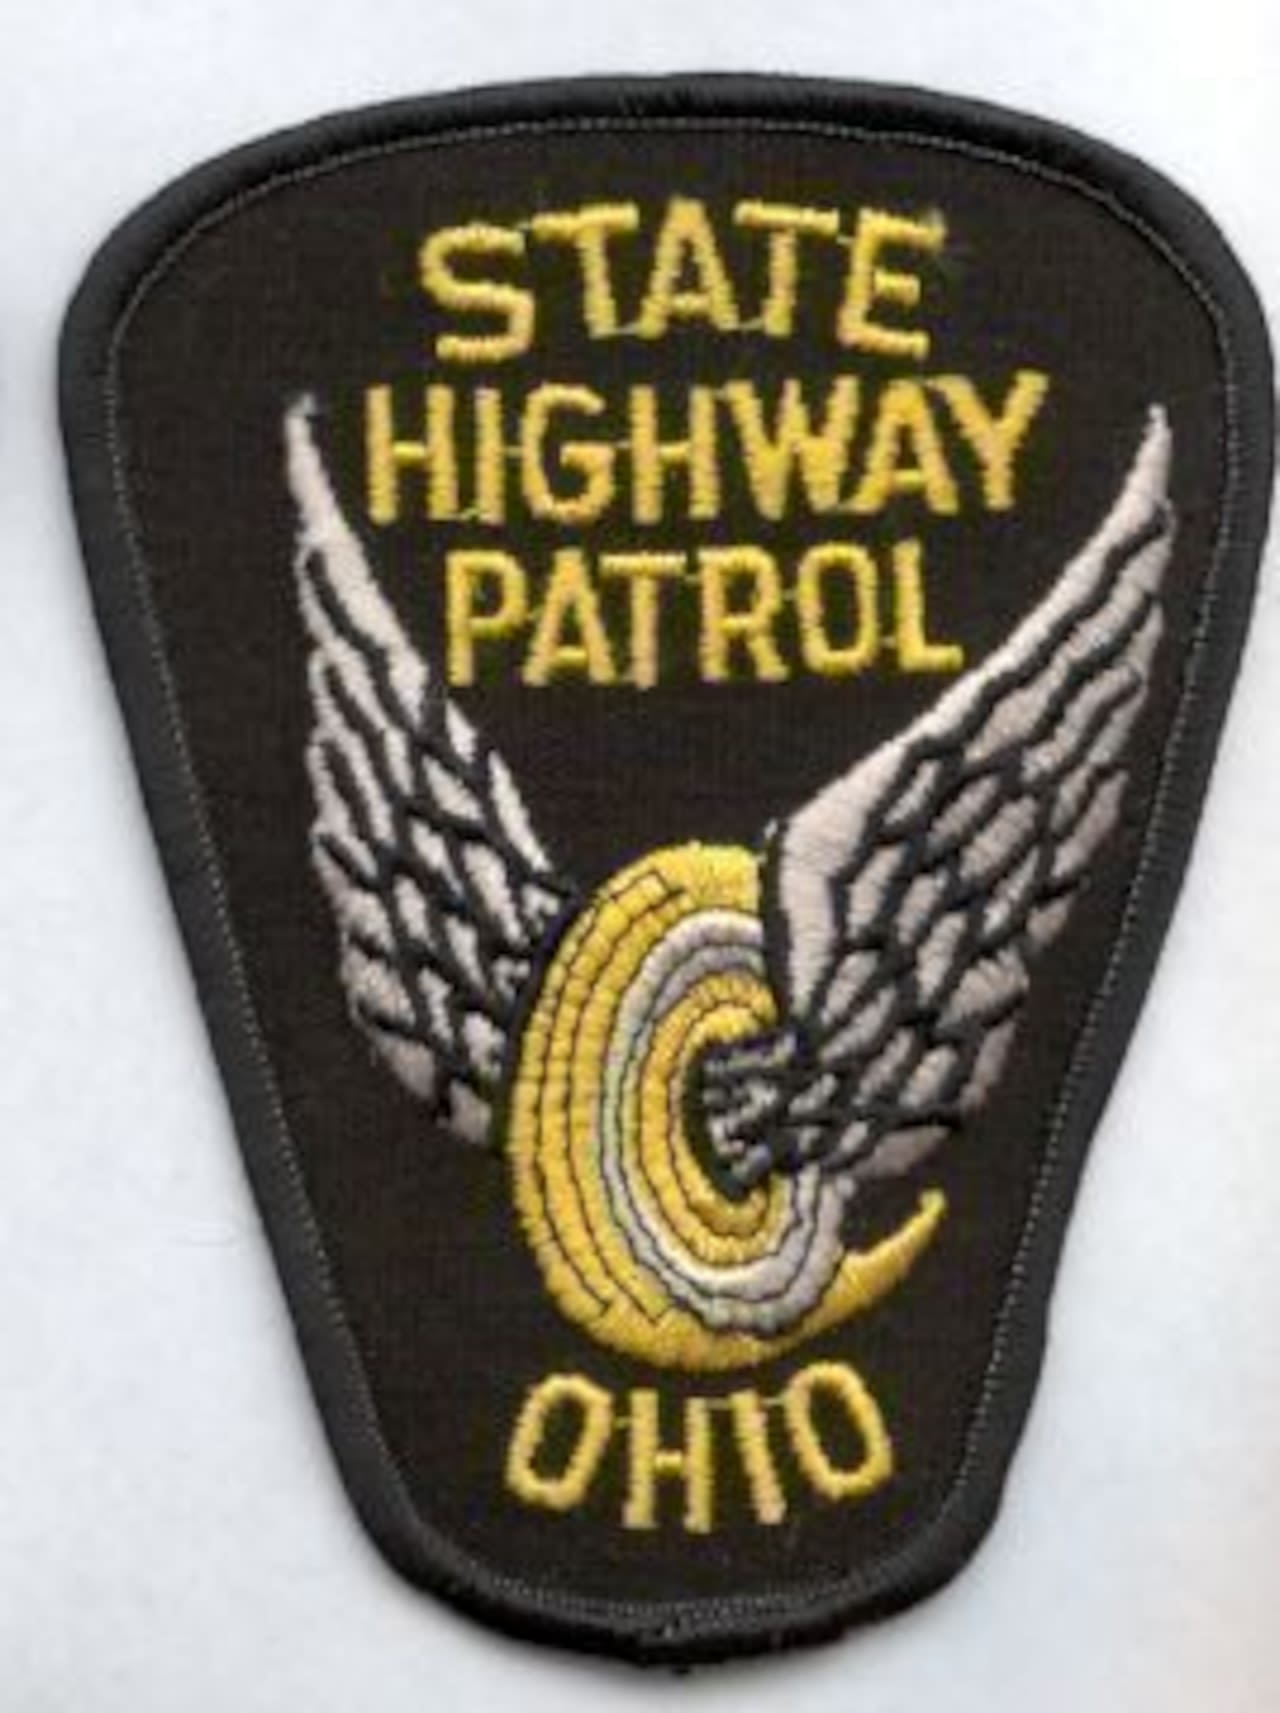 Lorain County woman dies in crash after swerving to avoid disabled tractor-trailer